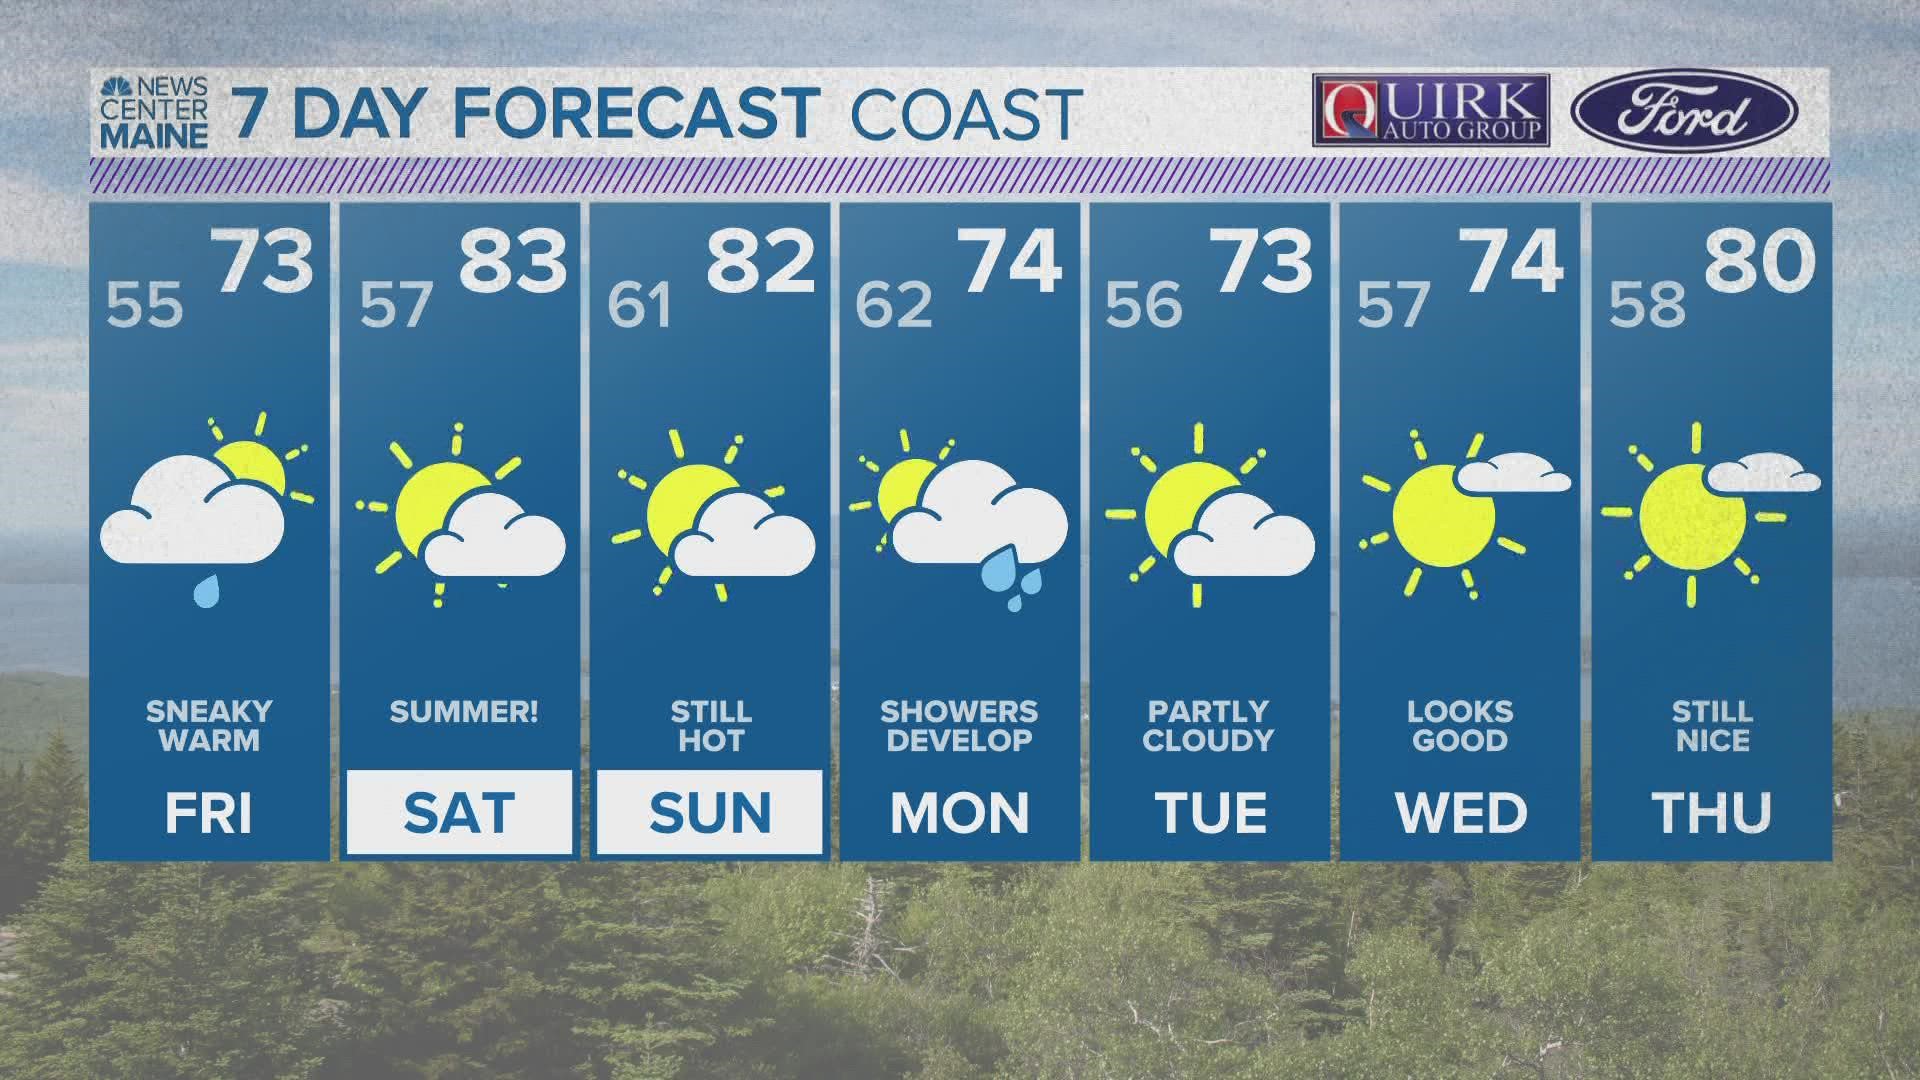 NEWS CENTER Maine Weather Video Forecast Updated 11:30pm Thursday, June 23rd